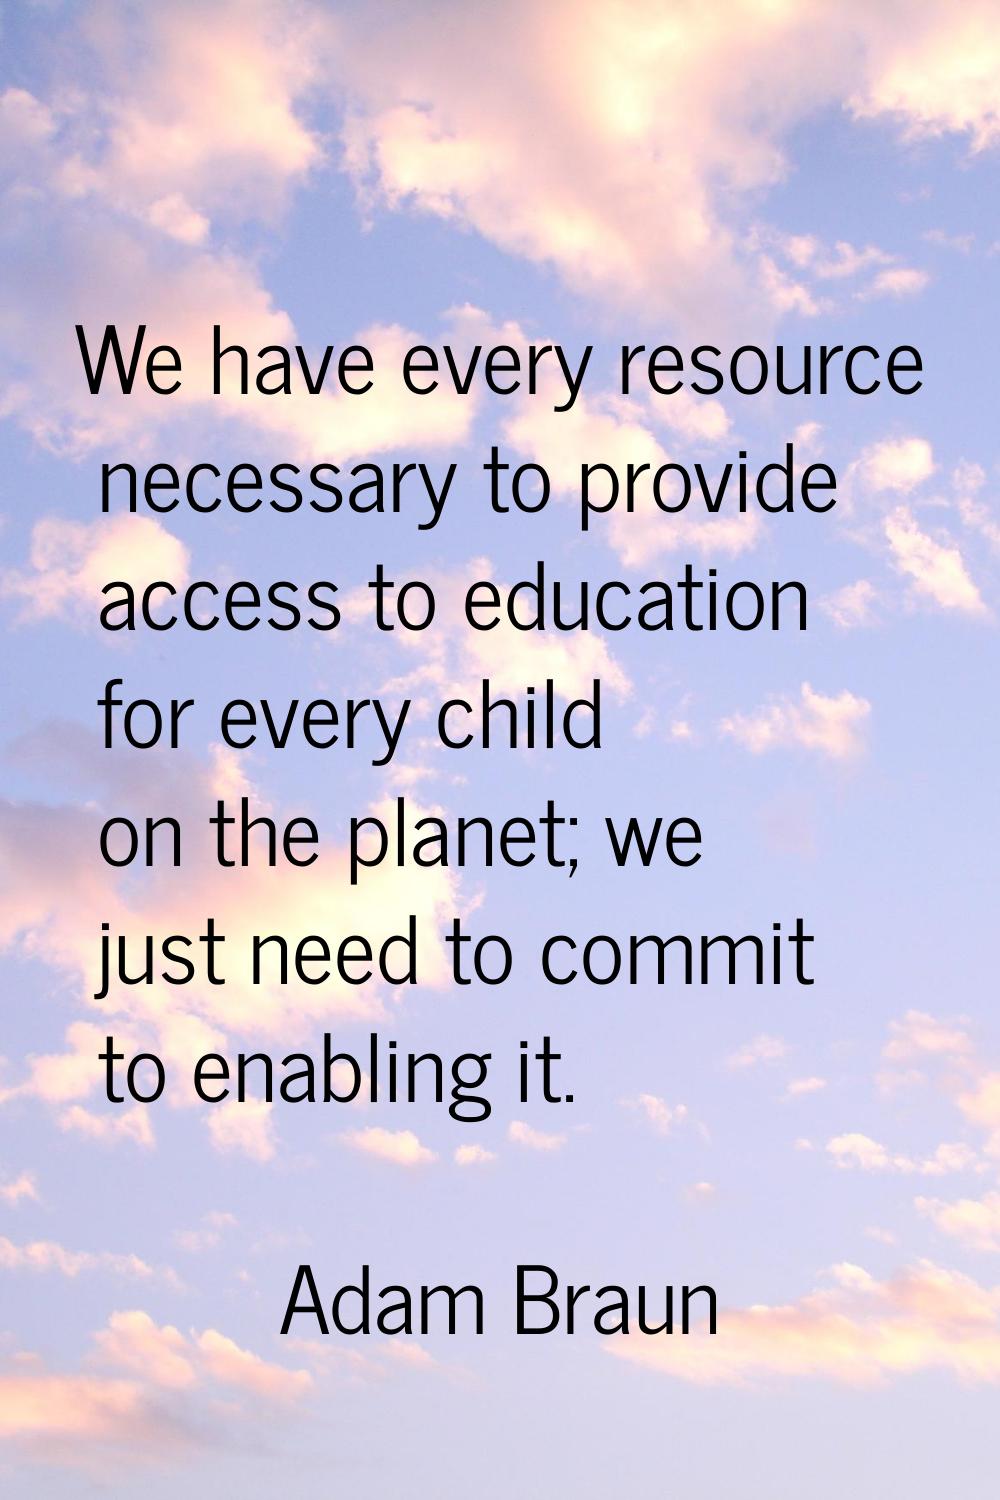 We have every resource necessary to provide access to education for every child on the planet; we j